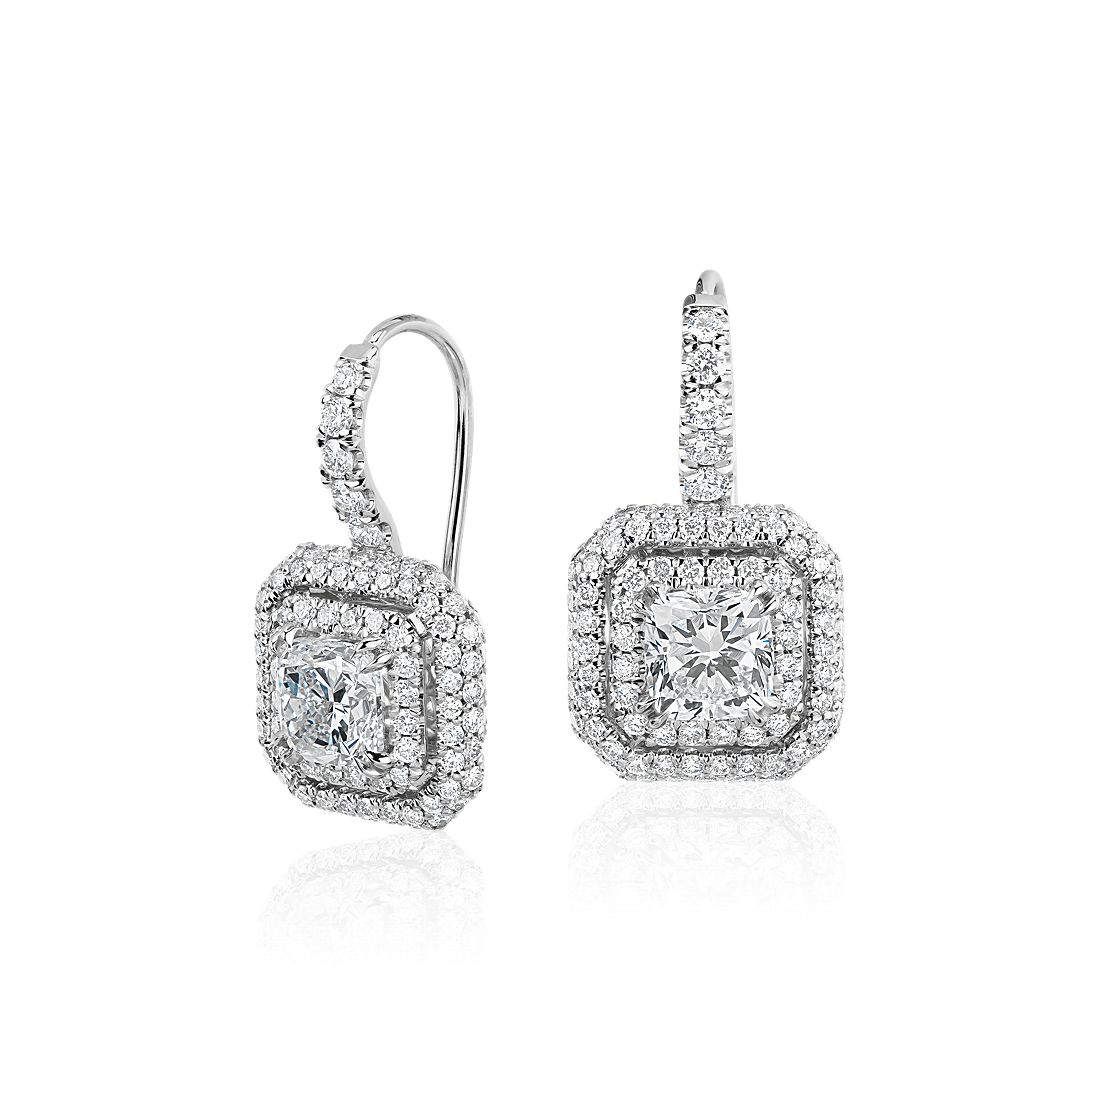 Diamond Dangle Earrings in 14k White Gold Double Halo Set 0.7 Ct Gift for Her